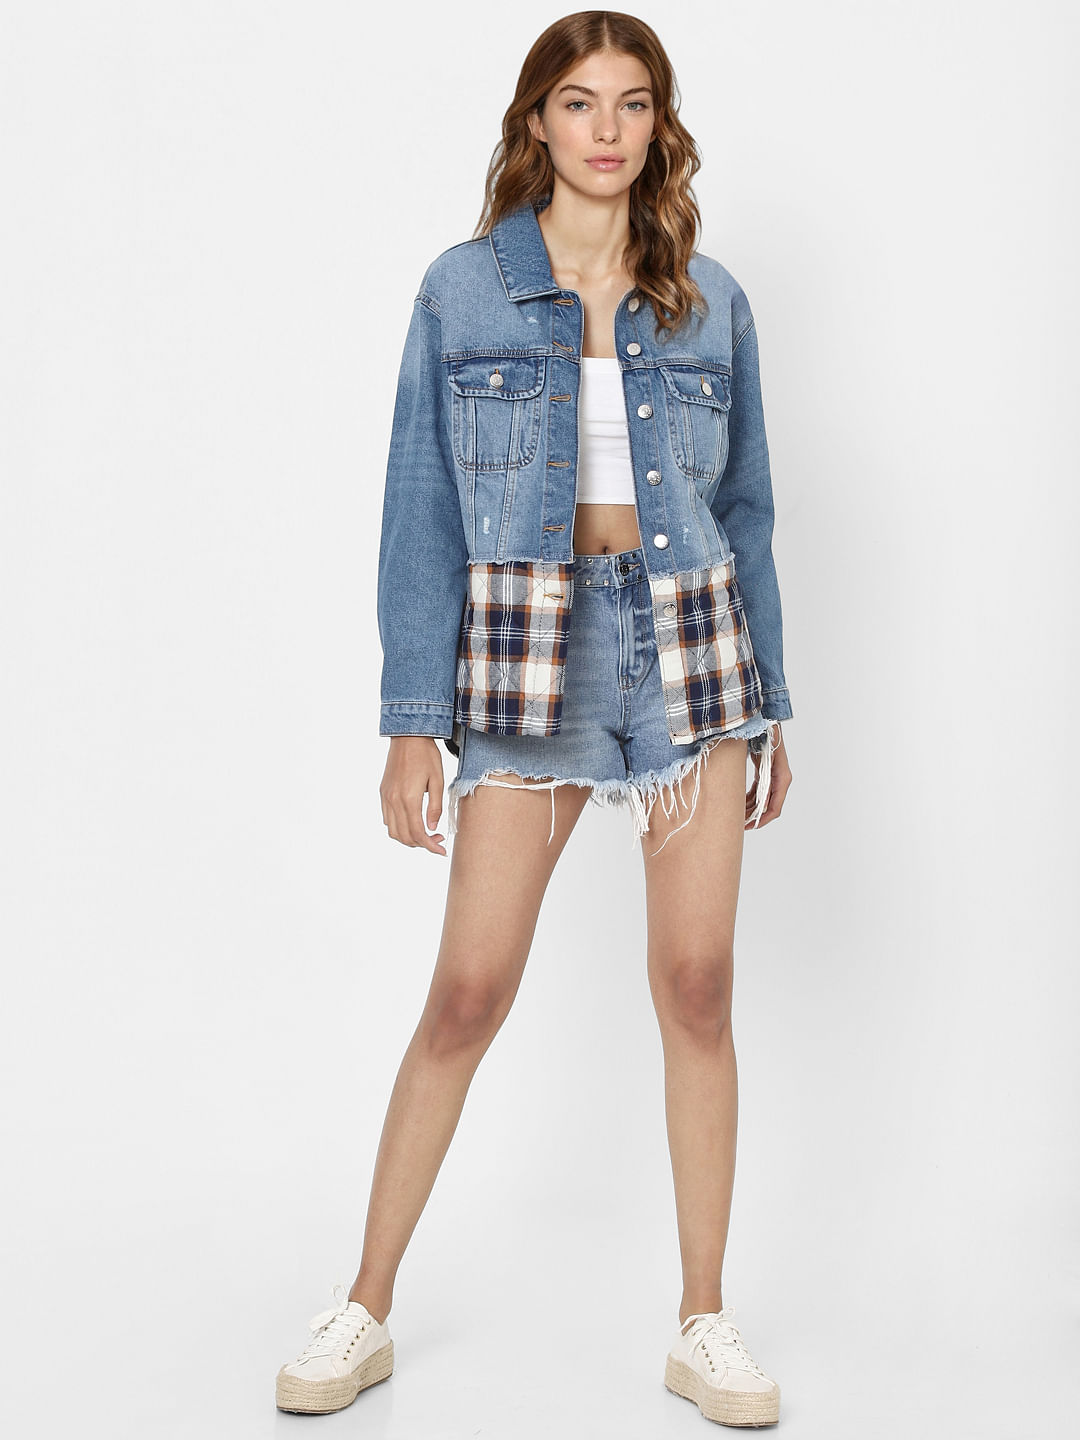 How To Style A Jean Jacket – 15 Fresh Outfit Ideas You Need To Try